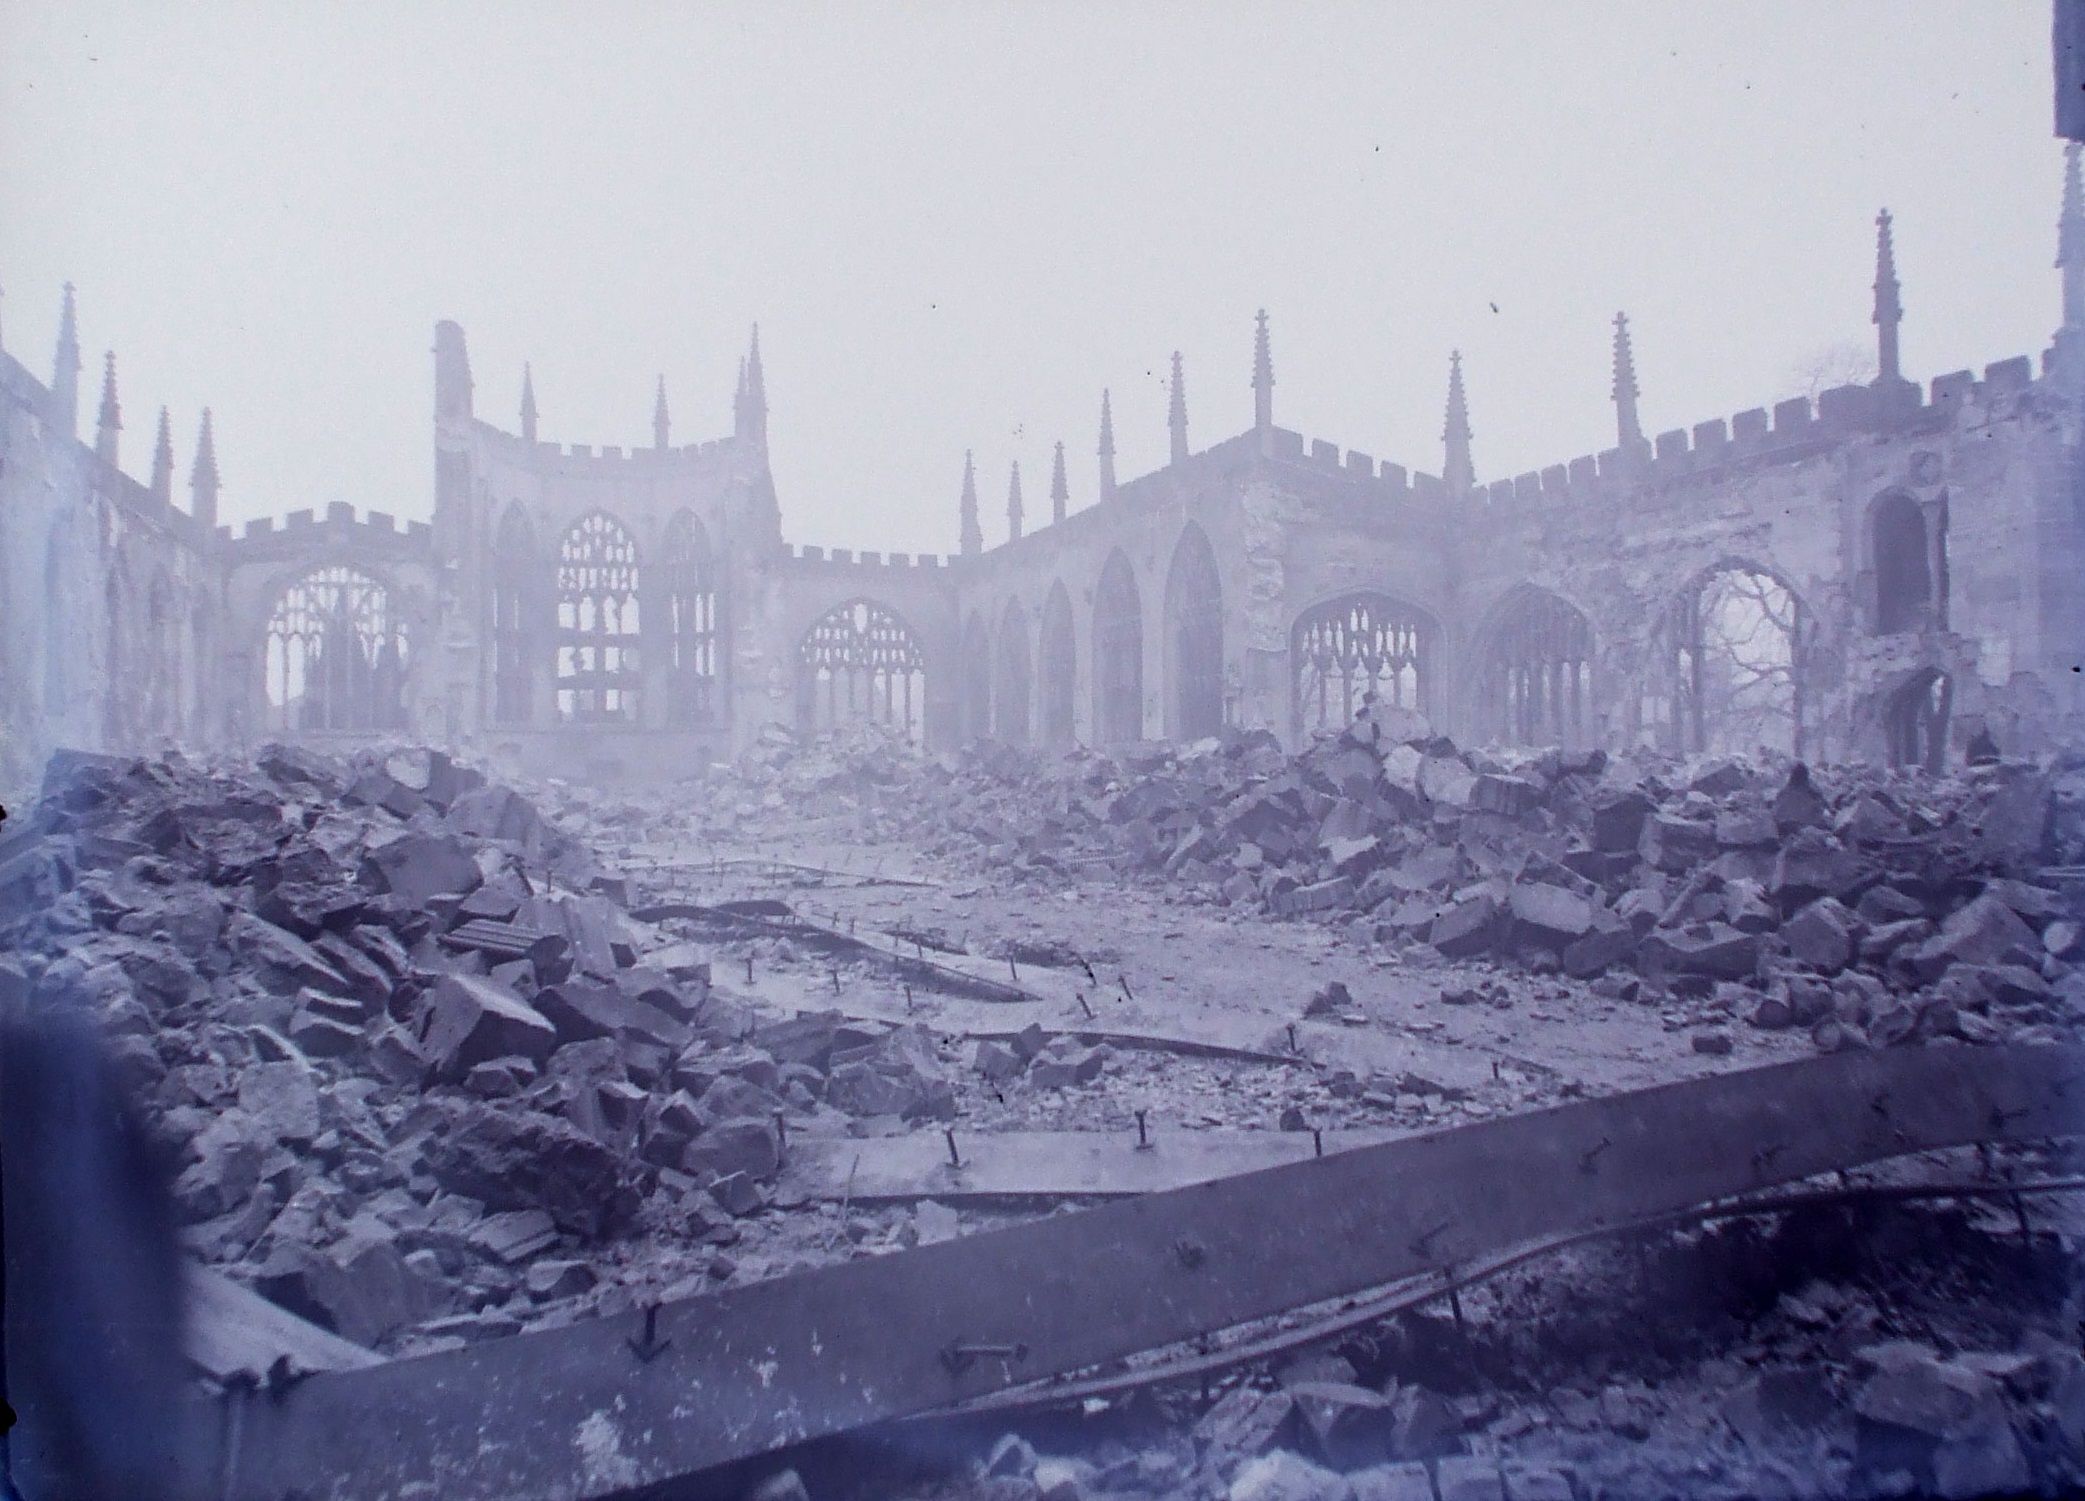 Coventry Cathedral in ruins. (Warwickshire County Record Office reference PH(N) 600/279/1)